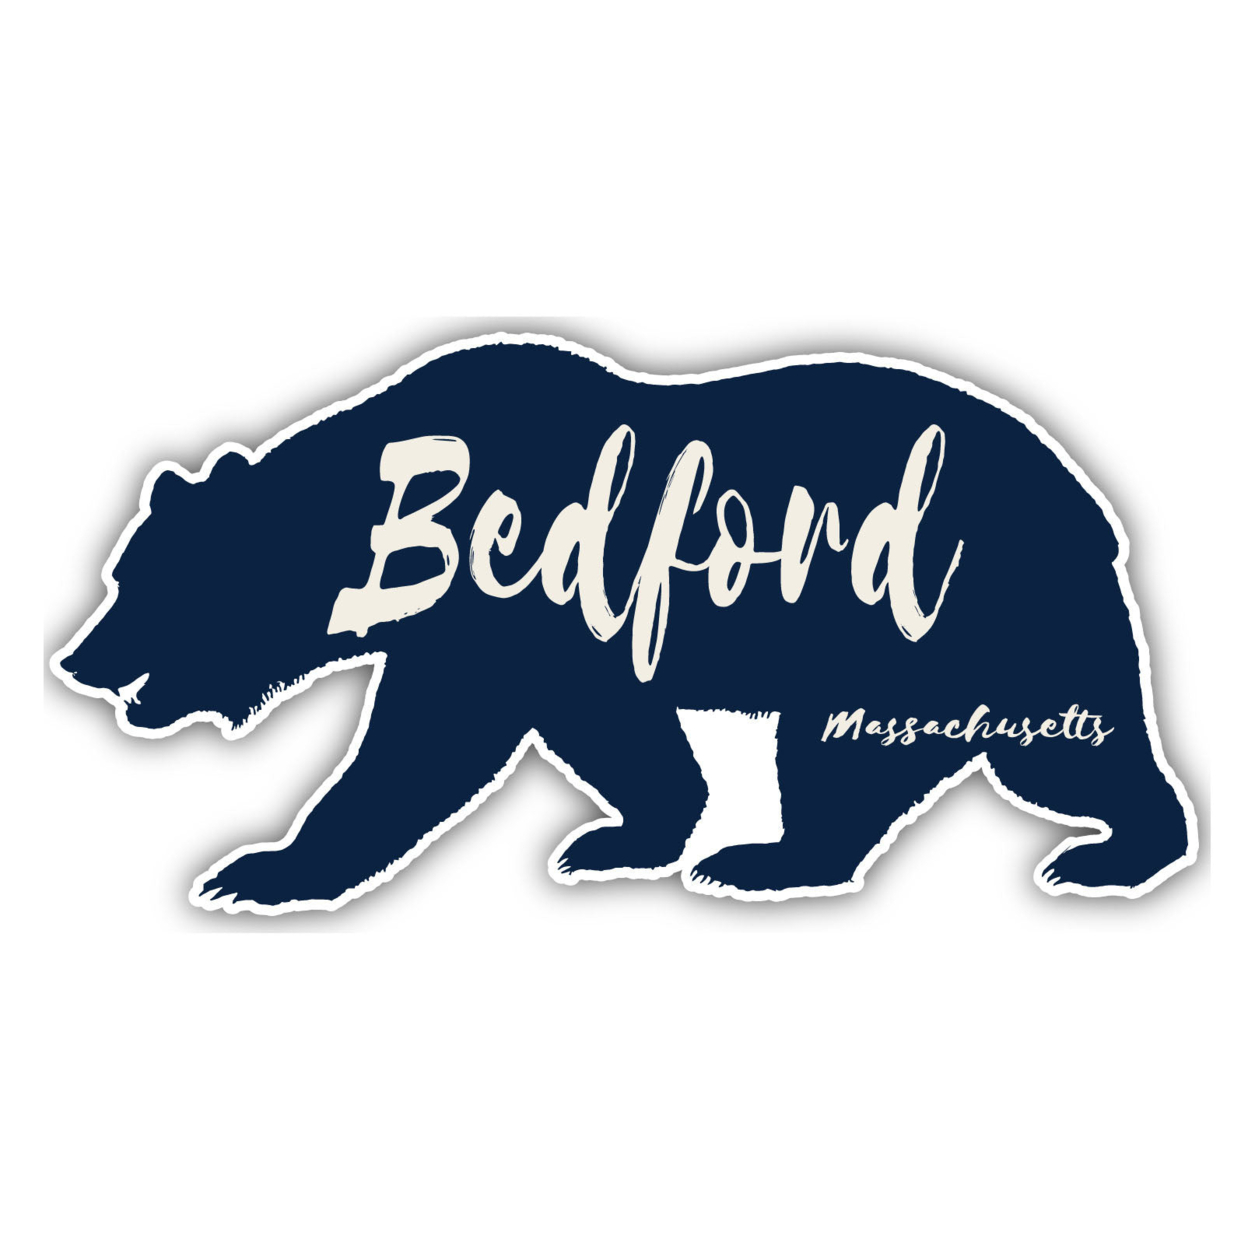 Bedford Massachusetts Souvenir Decorative Stickers (Choose Theme And Size) - 4-Pack, 2-Inch, Bear